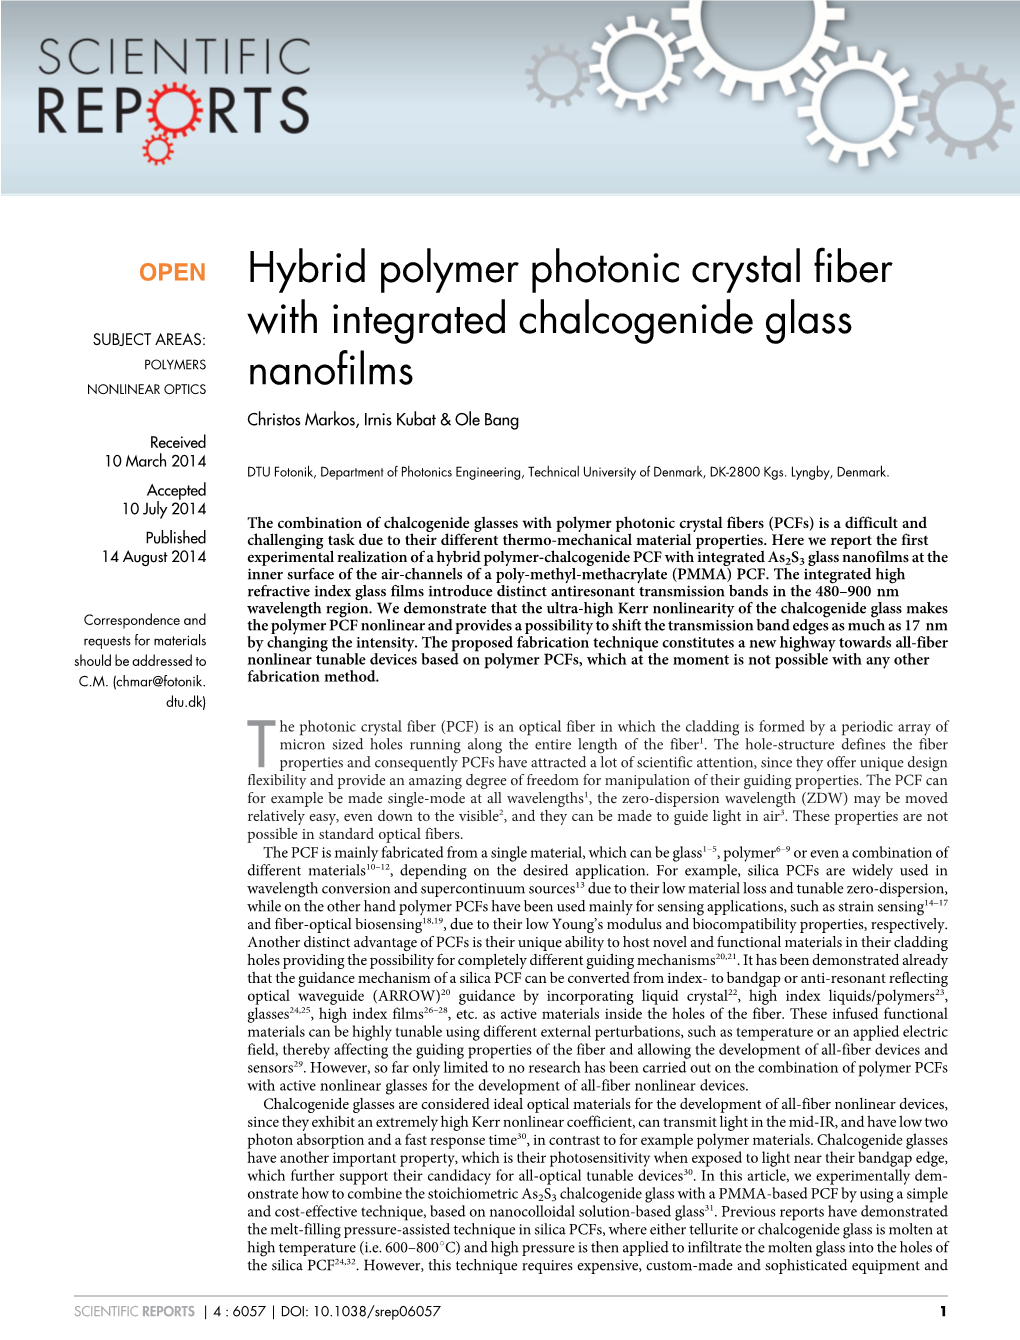 Hybrid Polymer Photonic Crystal Fiber with Integrated